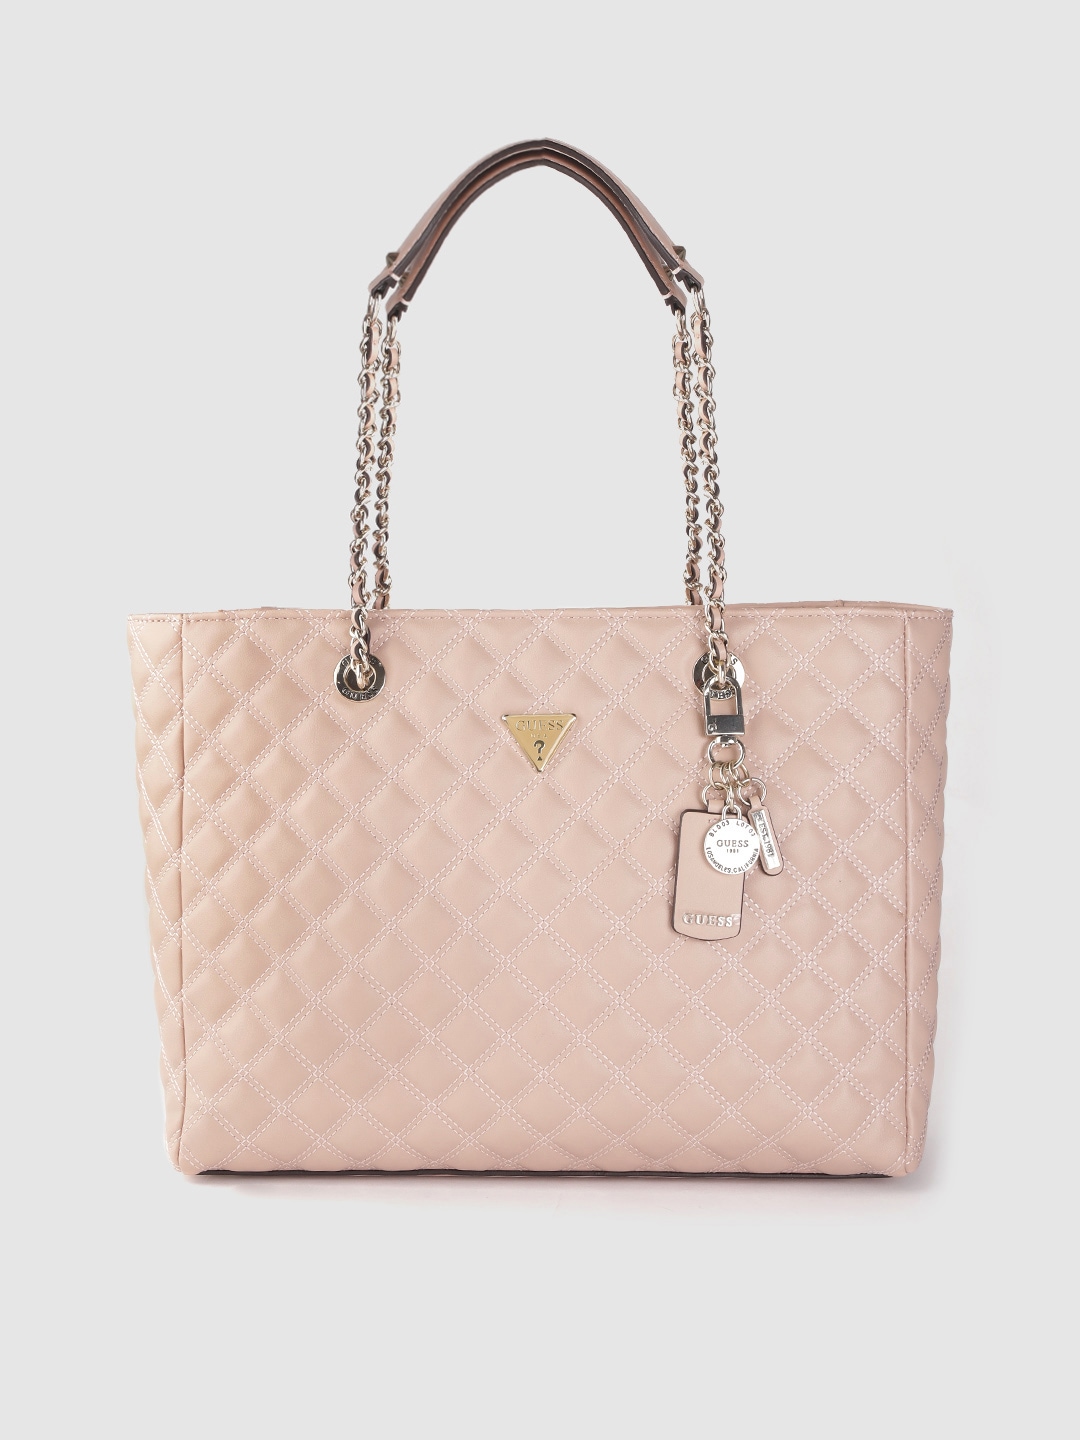 GUESS Women Pink Quilted Structured Shoulder Bag Price in India